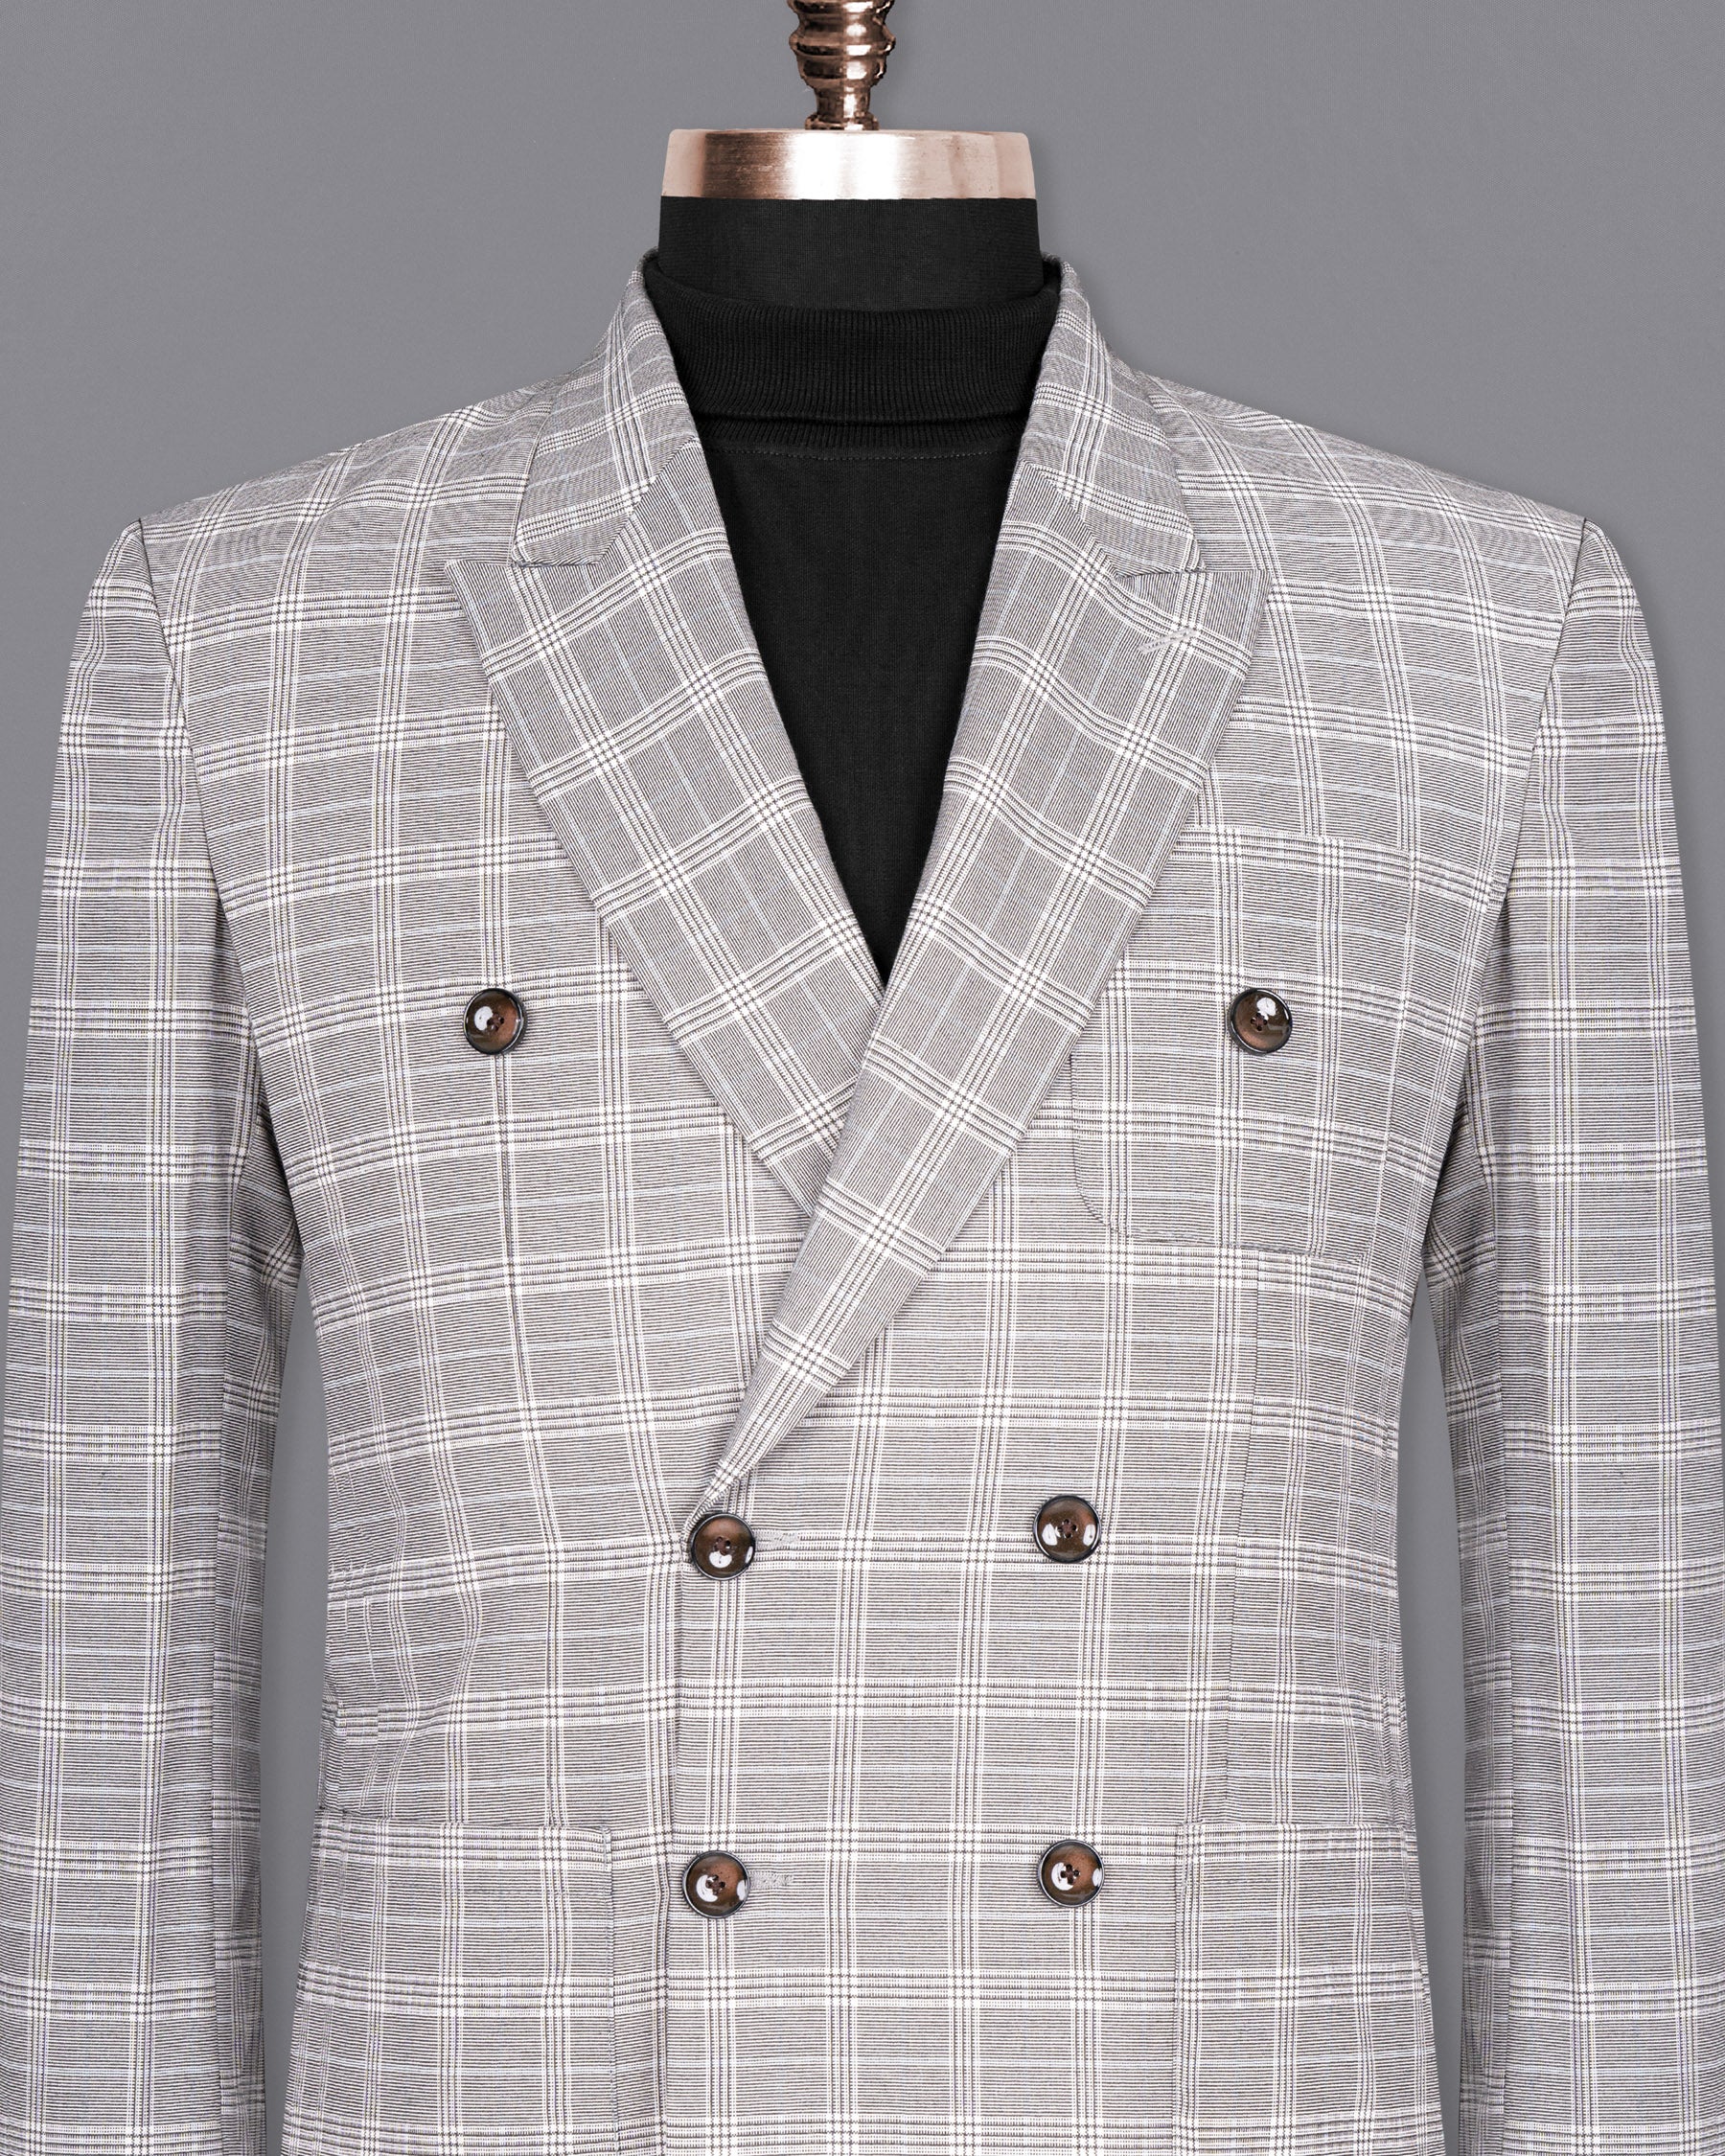 Mercury Grey Plaid Woolrich Double-Breasted Blazer BL1478-D22-36,BL1478-DB-PP-38,BL1478-DB-PP-40,BL1478-DB-PP-42,BL1478-DB-PP-44,BL1478-DB-PP-46,BL1478-DB-PP-48,BL1478-DB-PP-50,BL1478-DB-PP-52,BL1478-DB-PP-54,BL1478-DB-PP-56,BL1478-DB-PP-58,BL1478-DB-PP-60